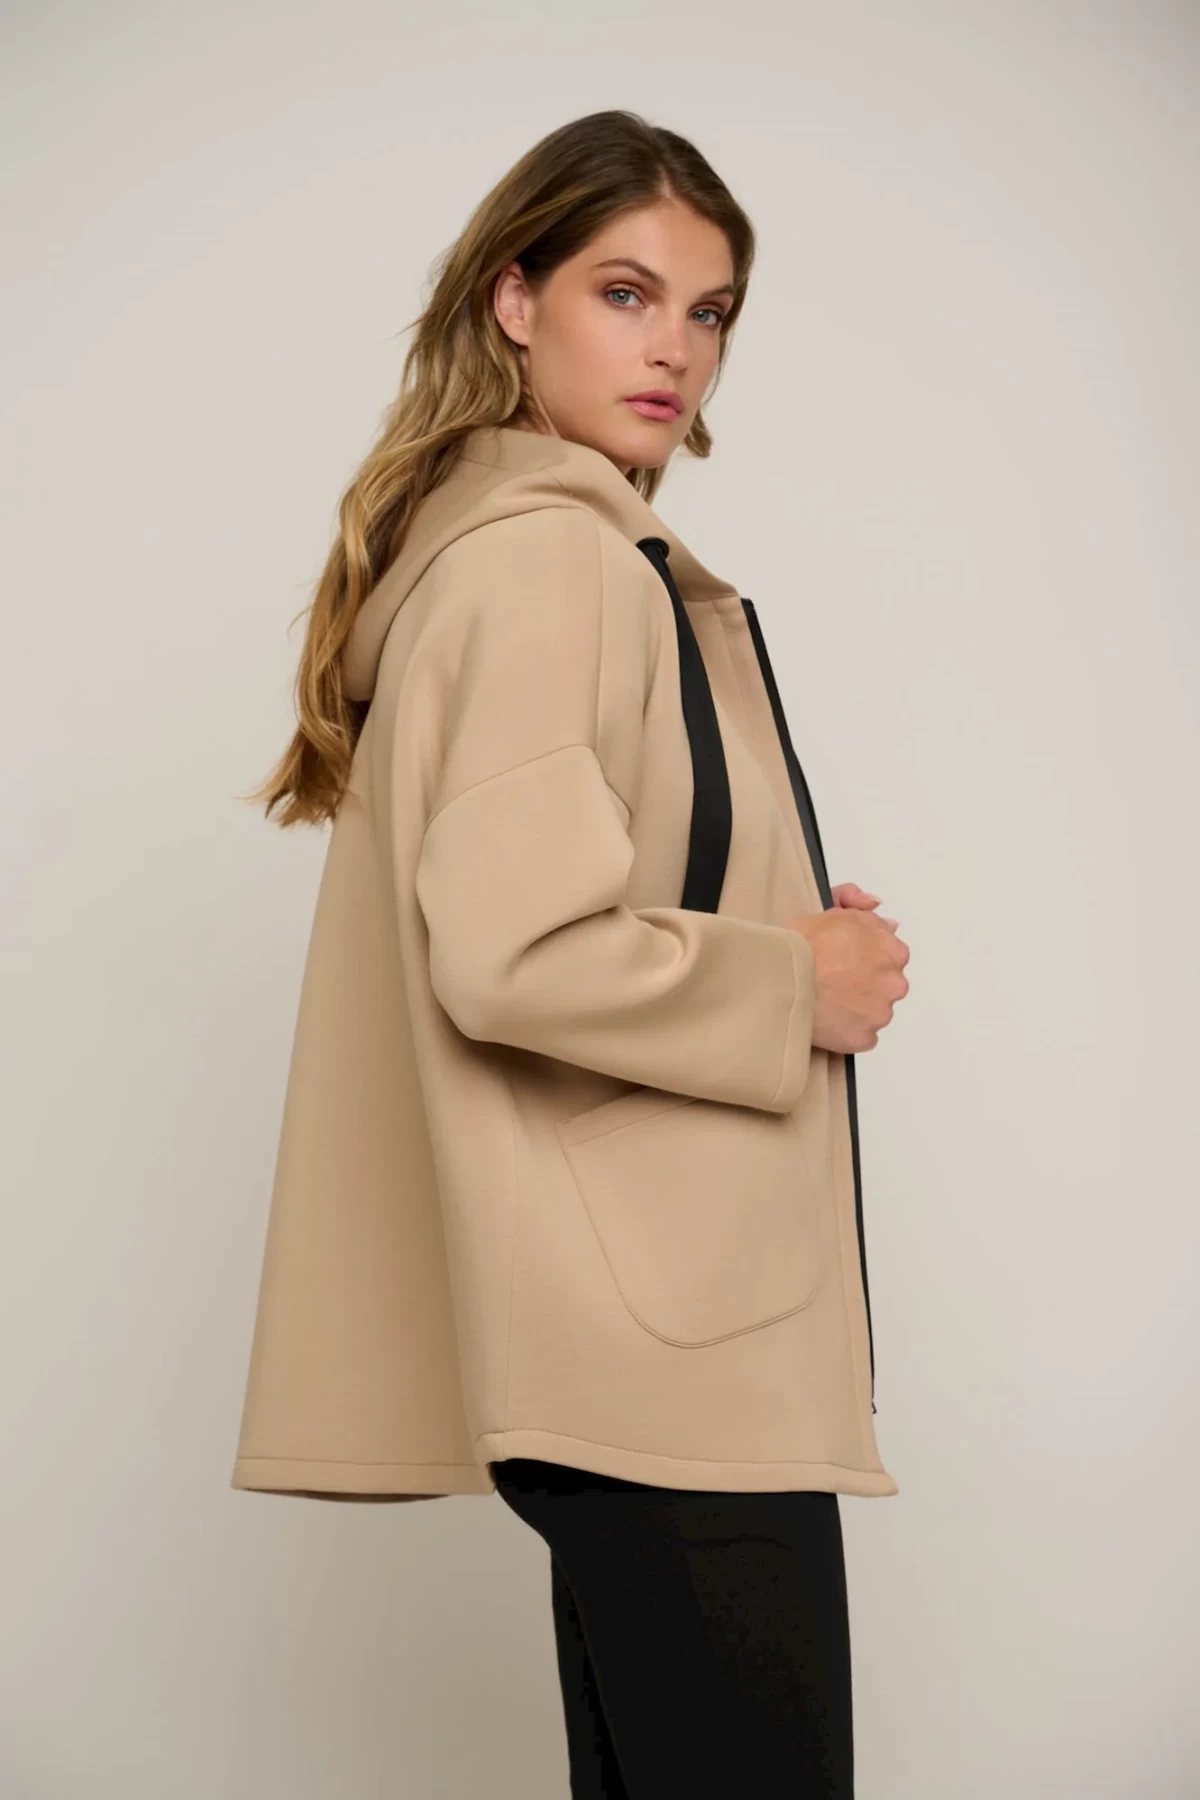 LADIES JACKET IN A LIGHTWEIGHT QUALIT WITH A SOFT FEEL WITH HOOD.